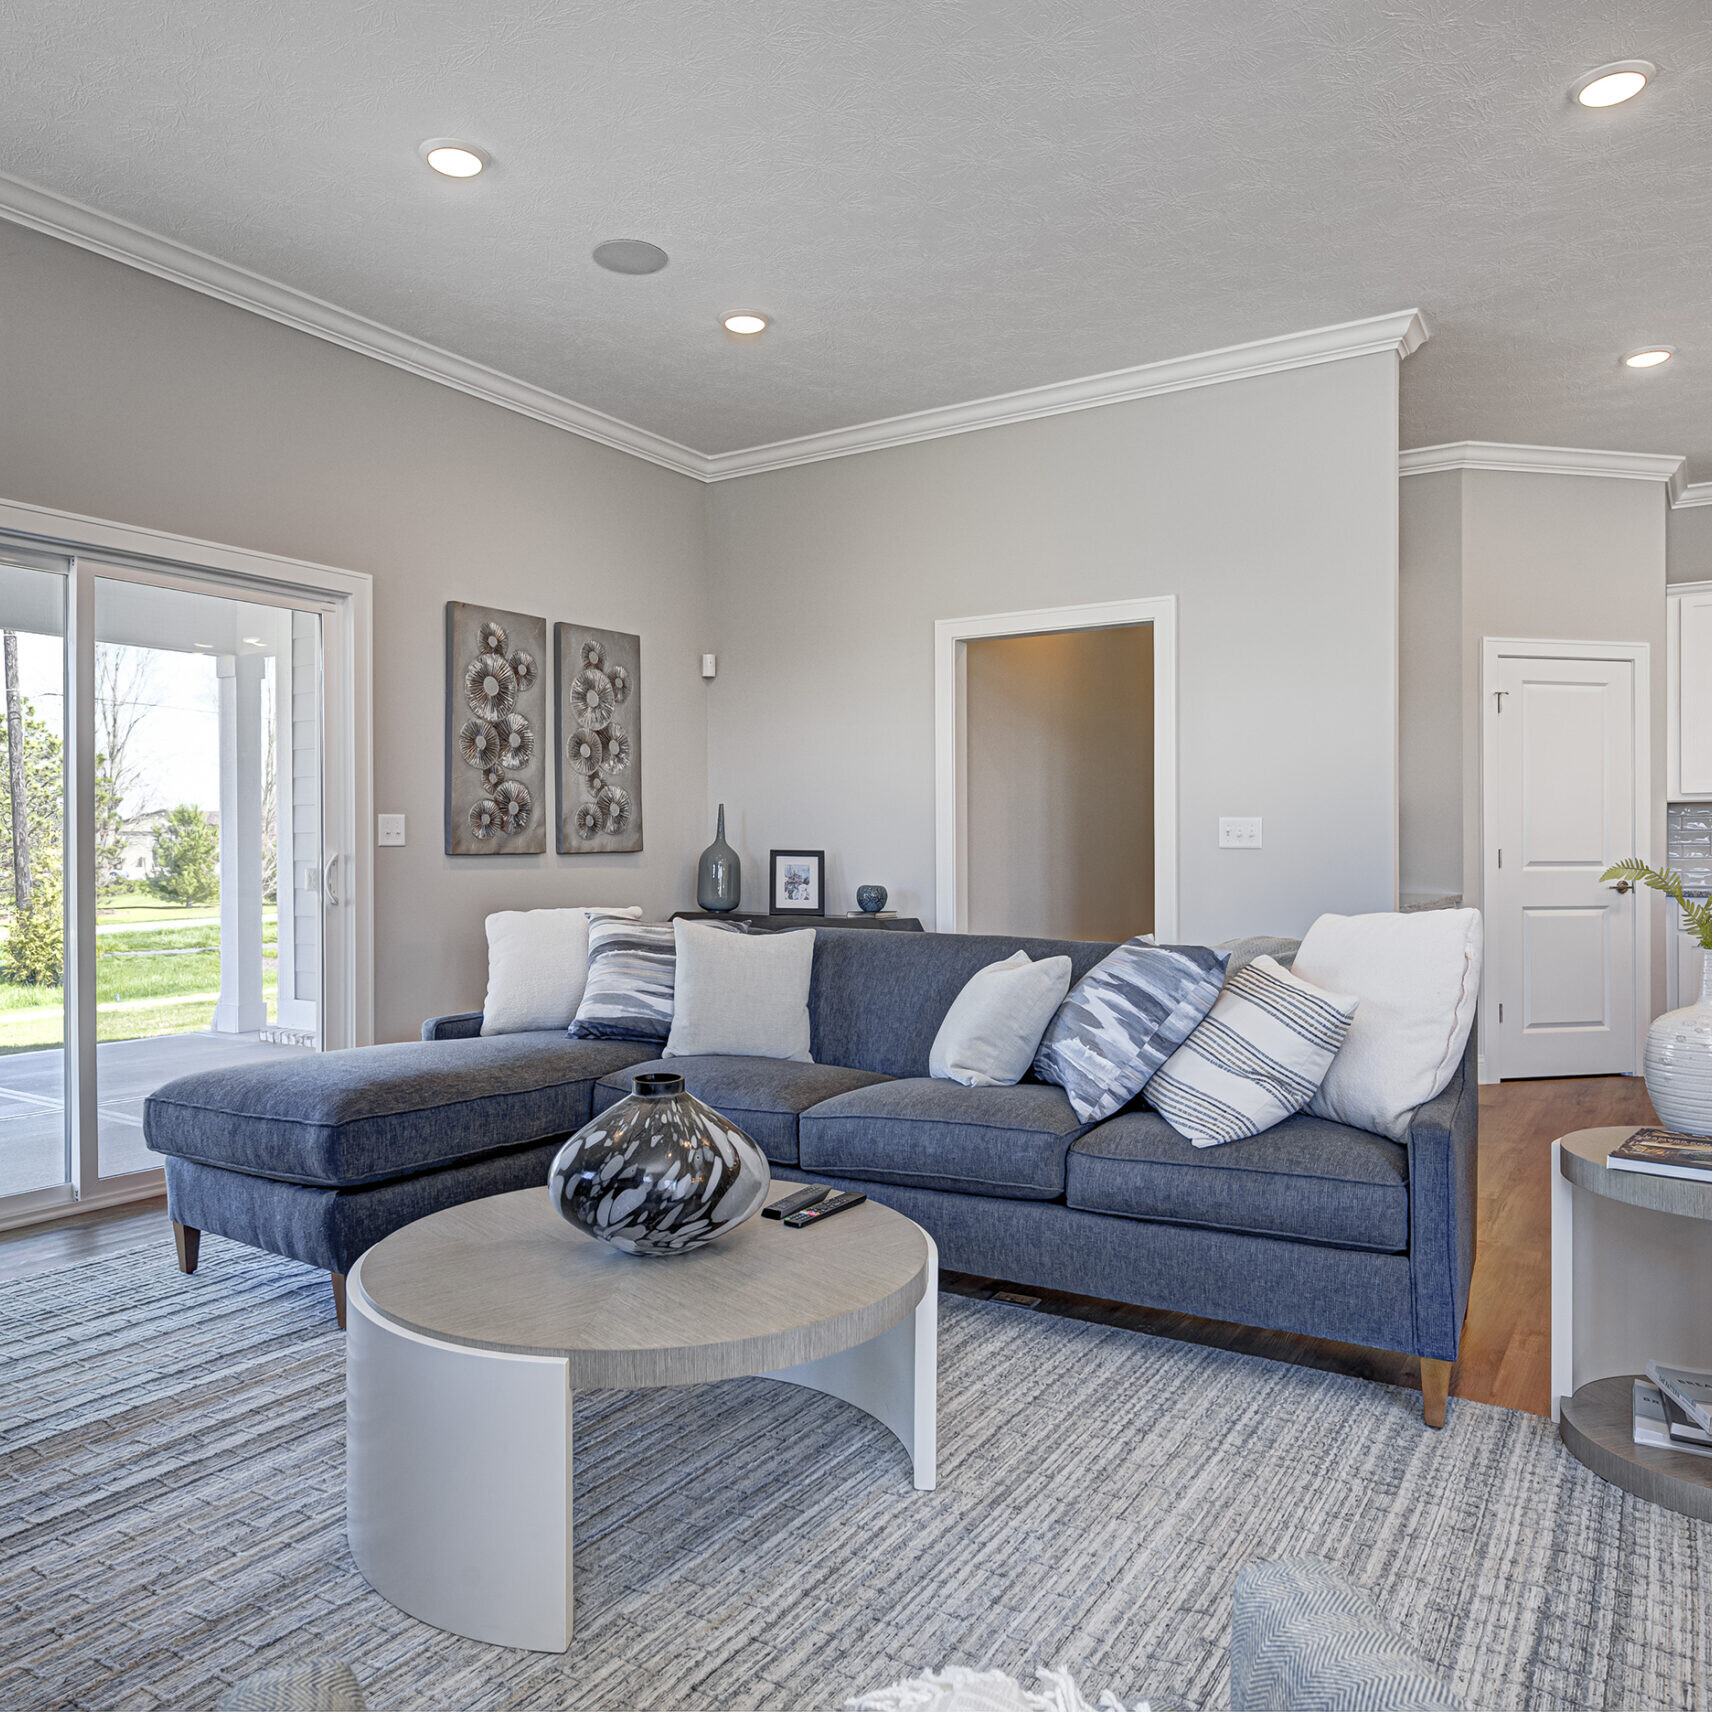 A living room with a gray couch and coffee table, designed by a Custom Home Builder in Carmel Indiana.